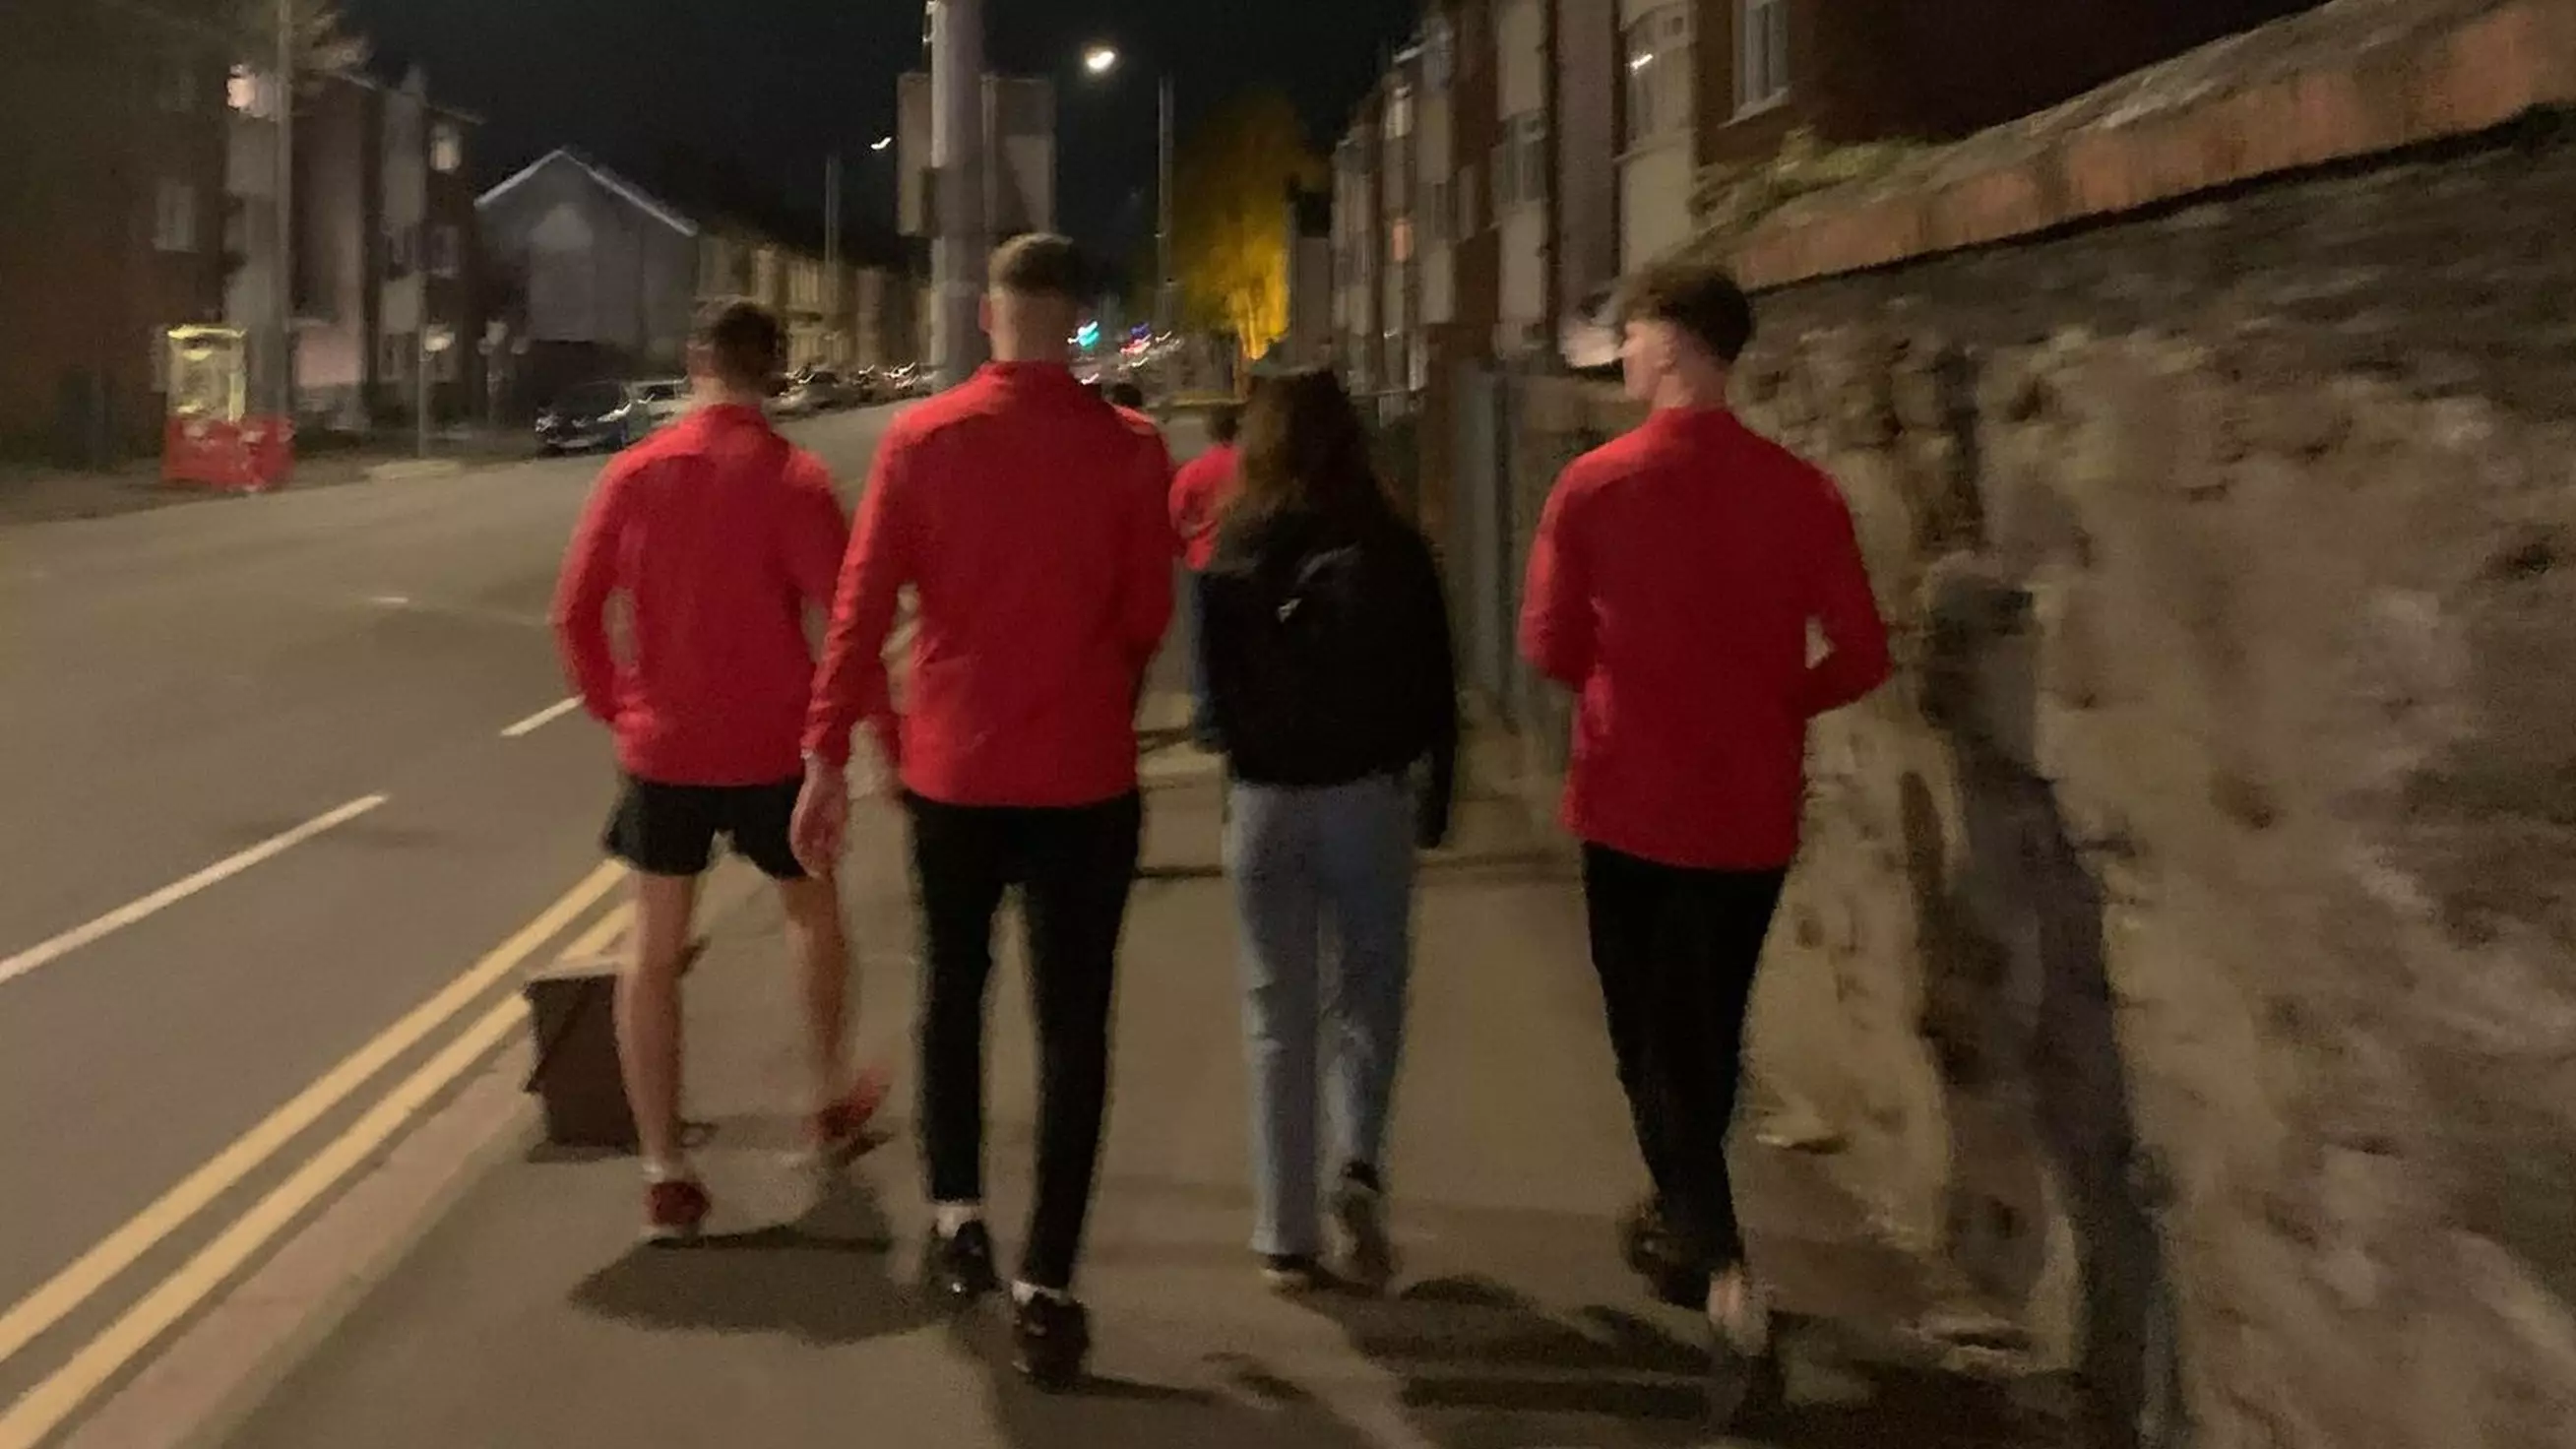 Male Students Spark Debate After Walking Female Friends Home On 'National Rape Day'